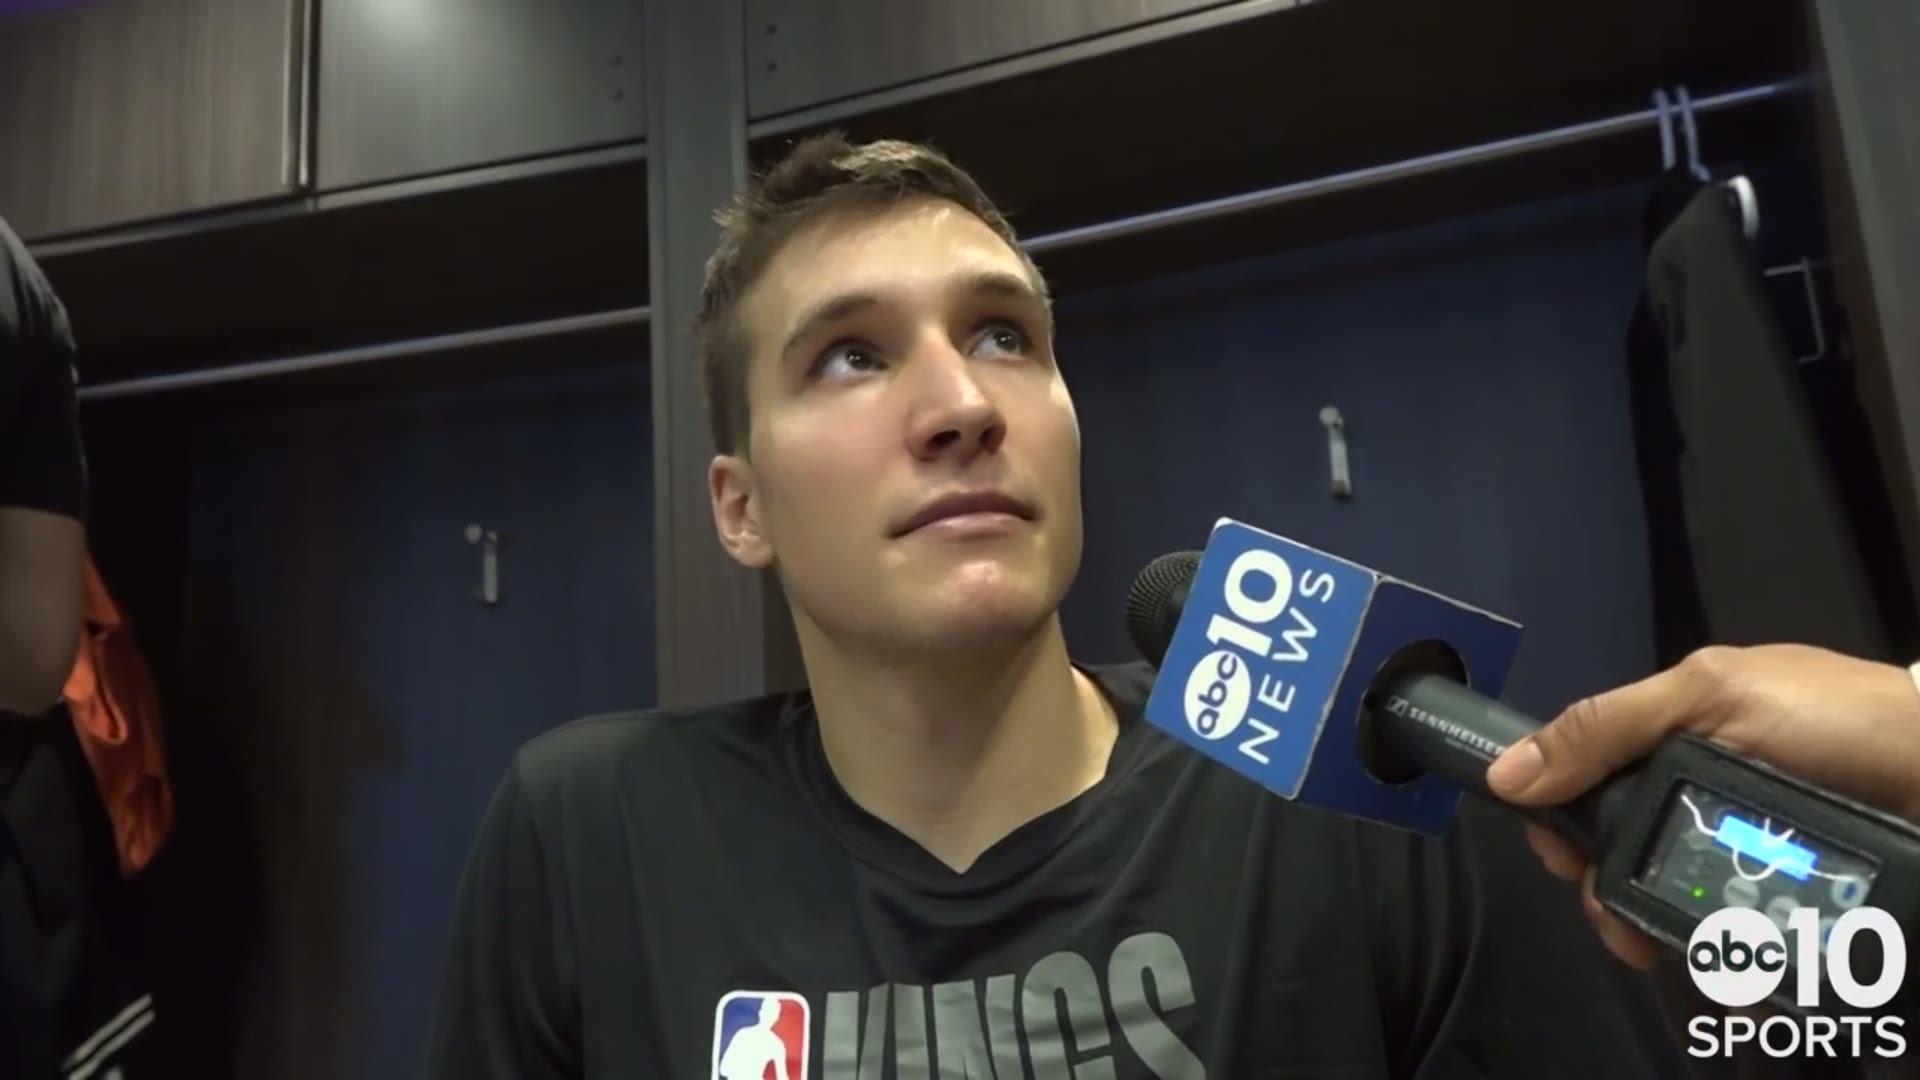 Sacramento Kings guard Bogdan Bogdanovic talks about Sunday’s 100-99 victory over the Boston Celtics and his improved play leading to team success.